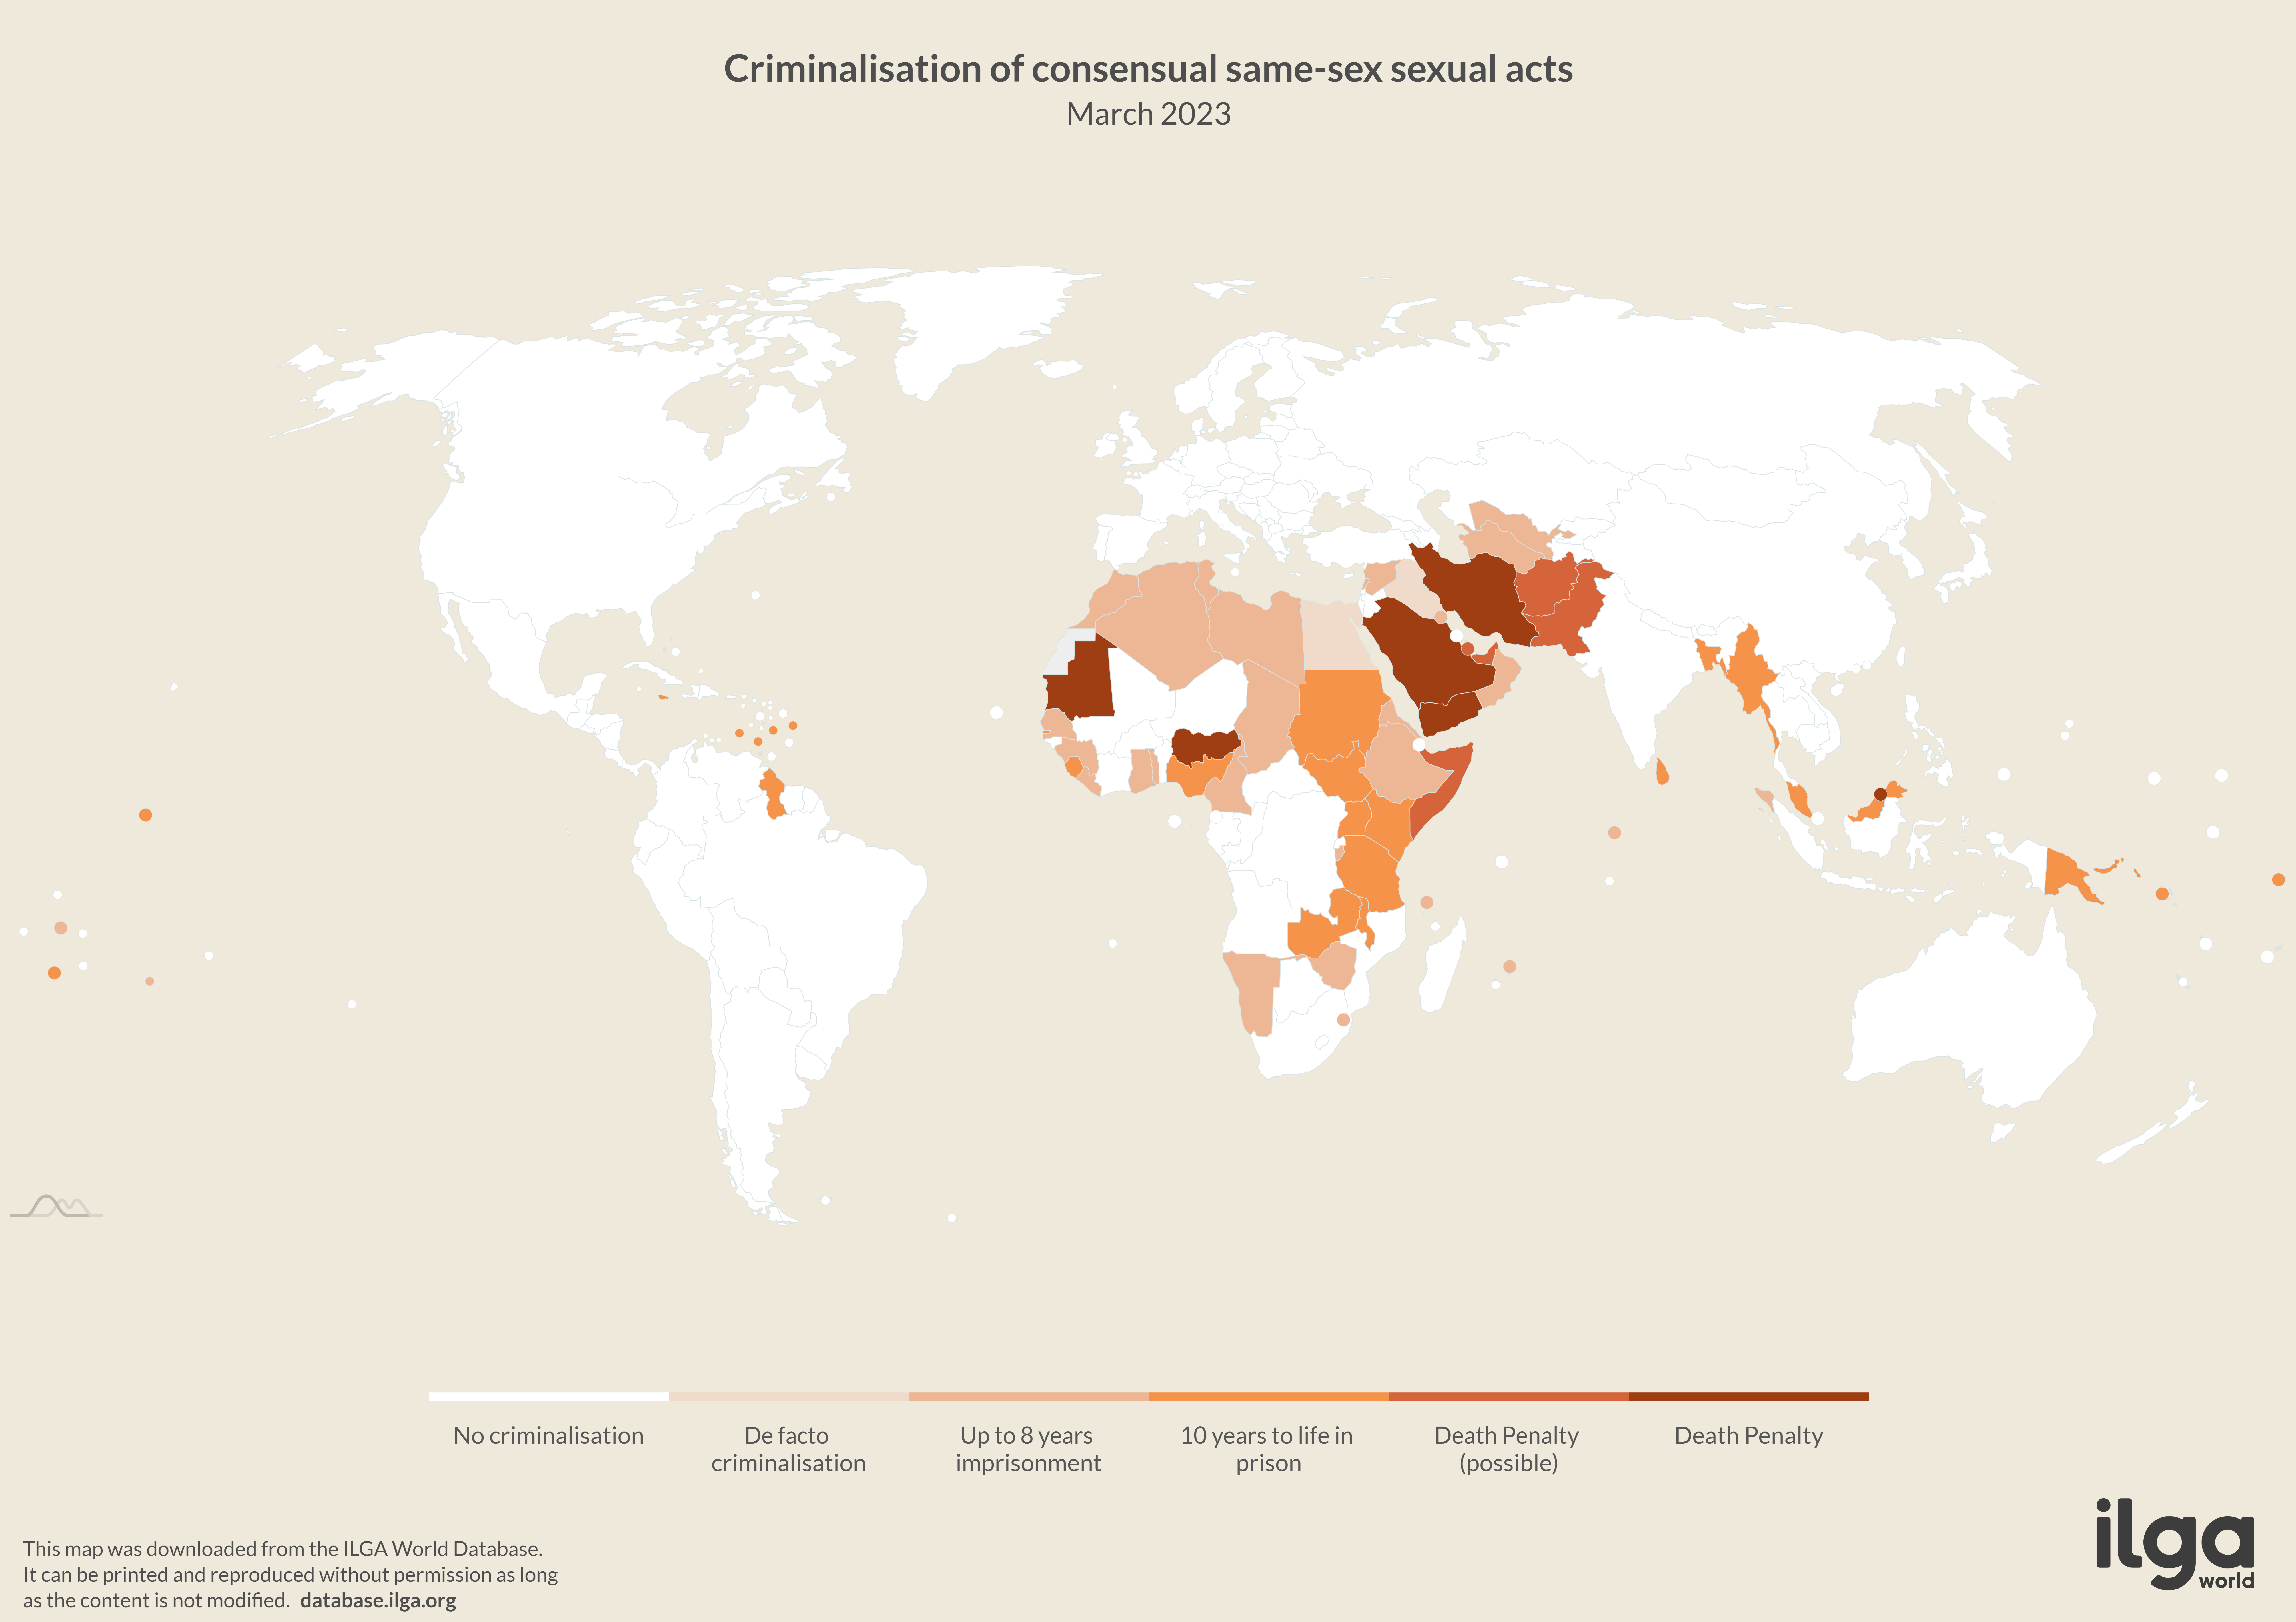 Maps showing criminalisation of same sex relations around the world